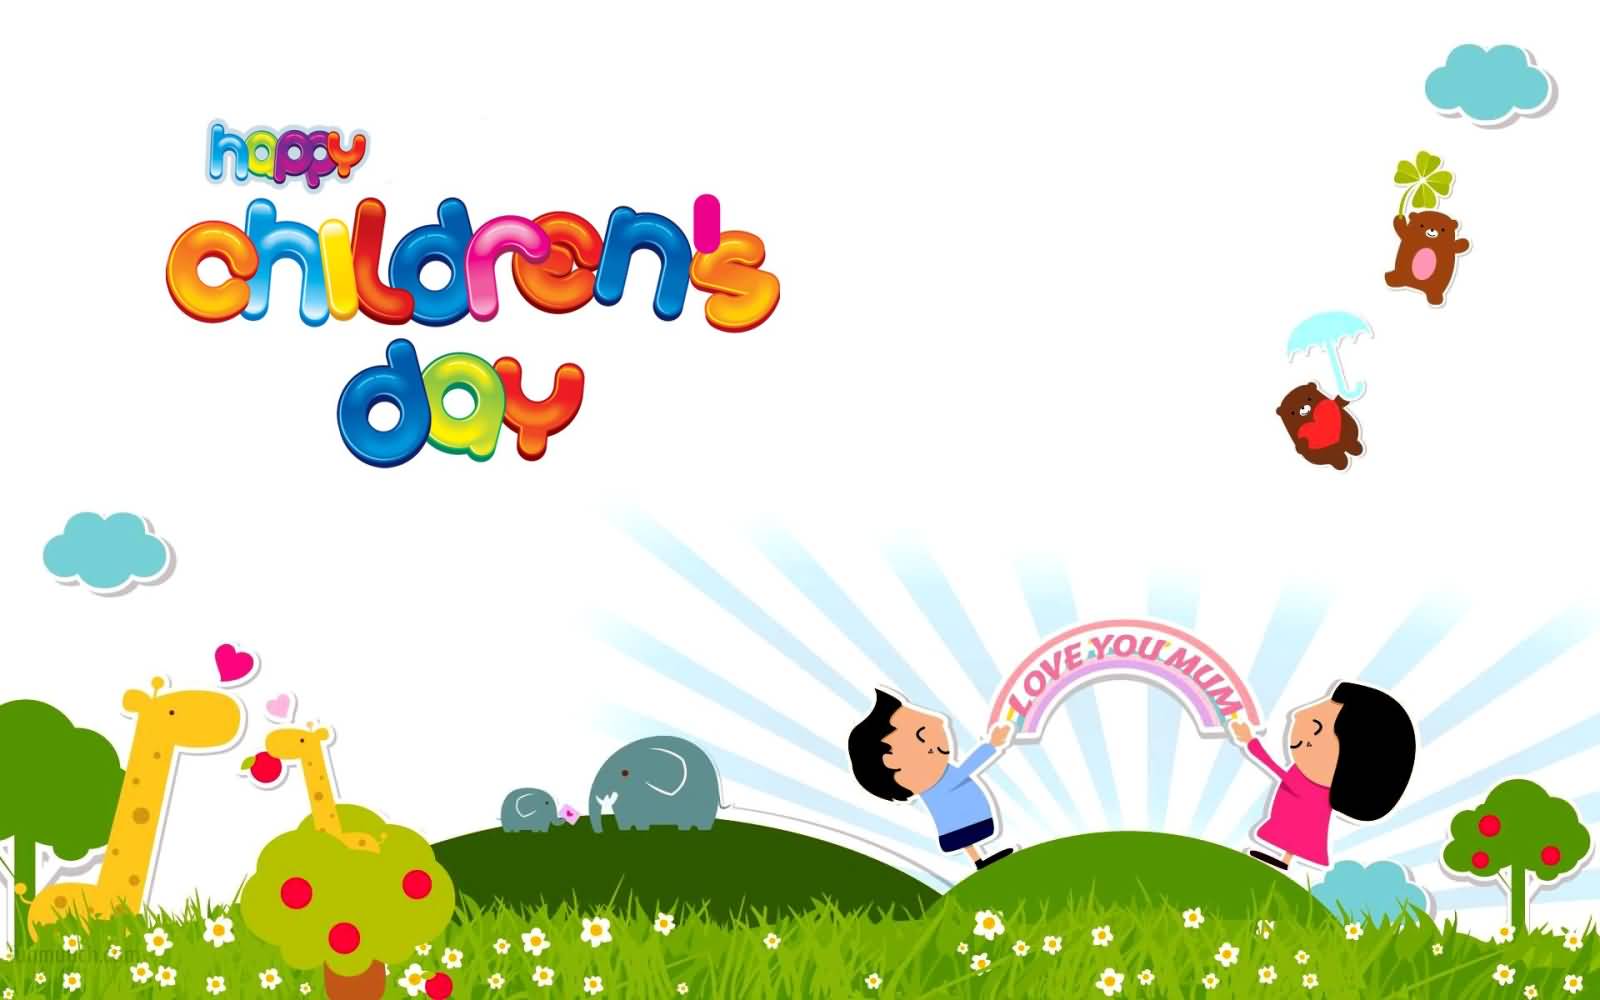 Happy Children's Day Wishes Picture For Facebook